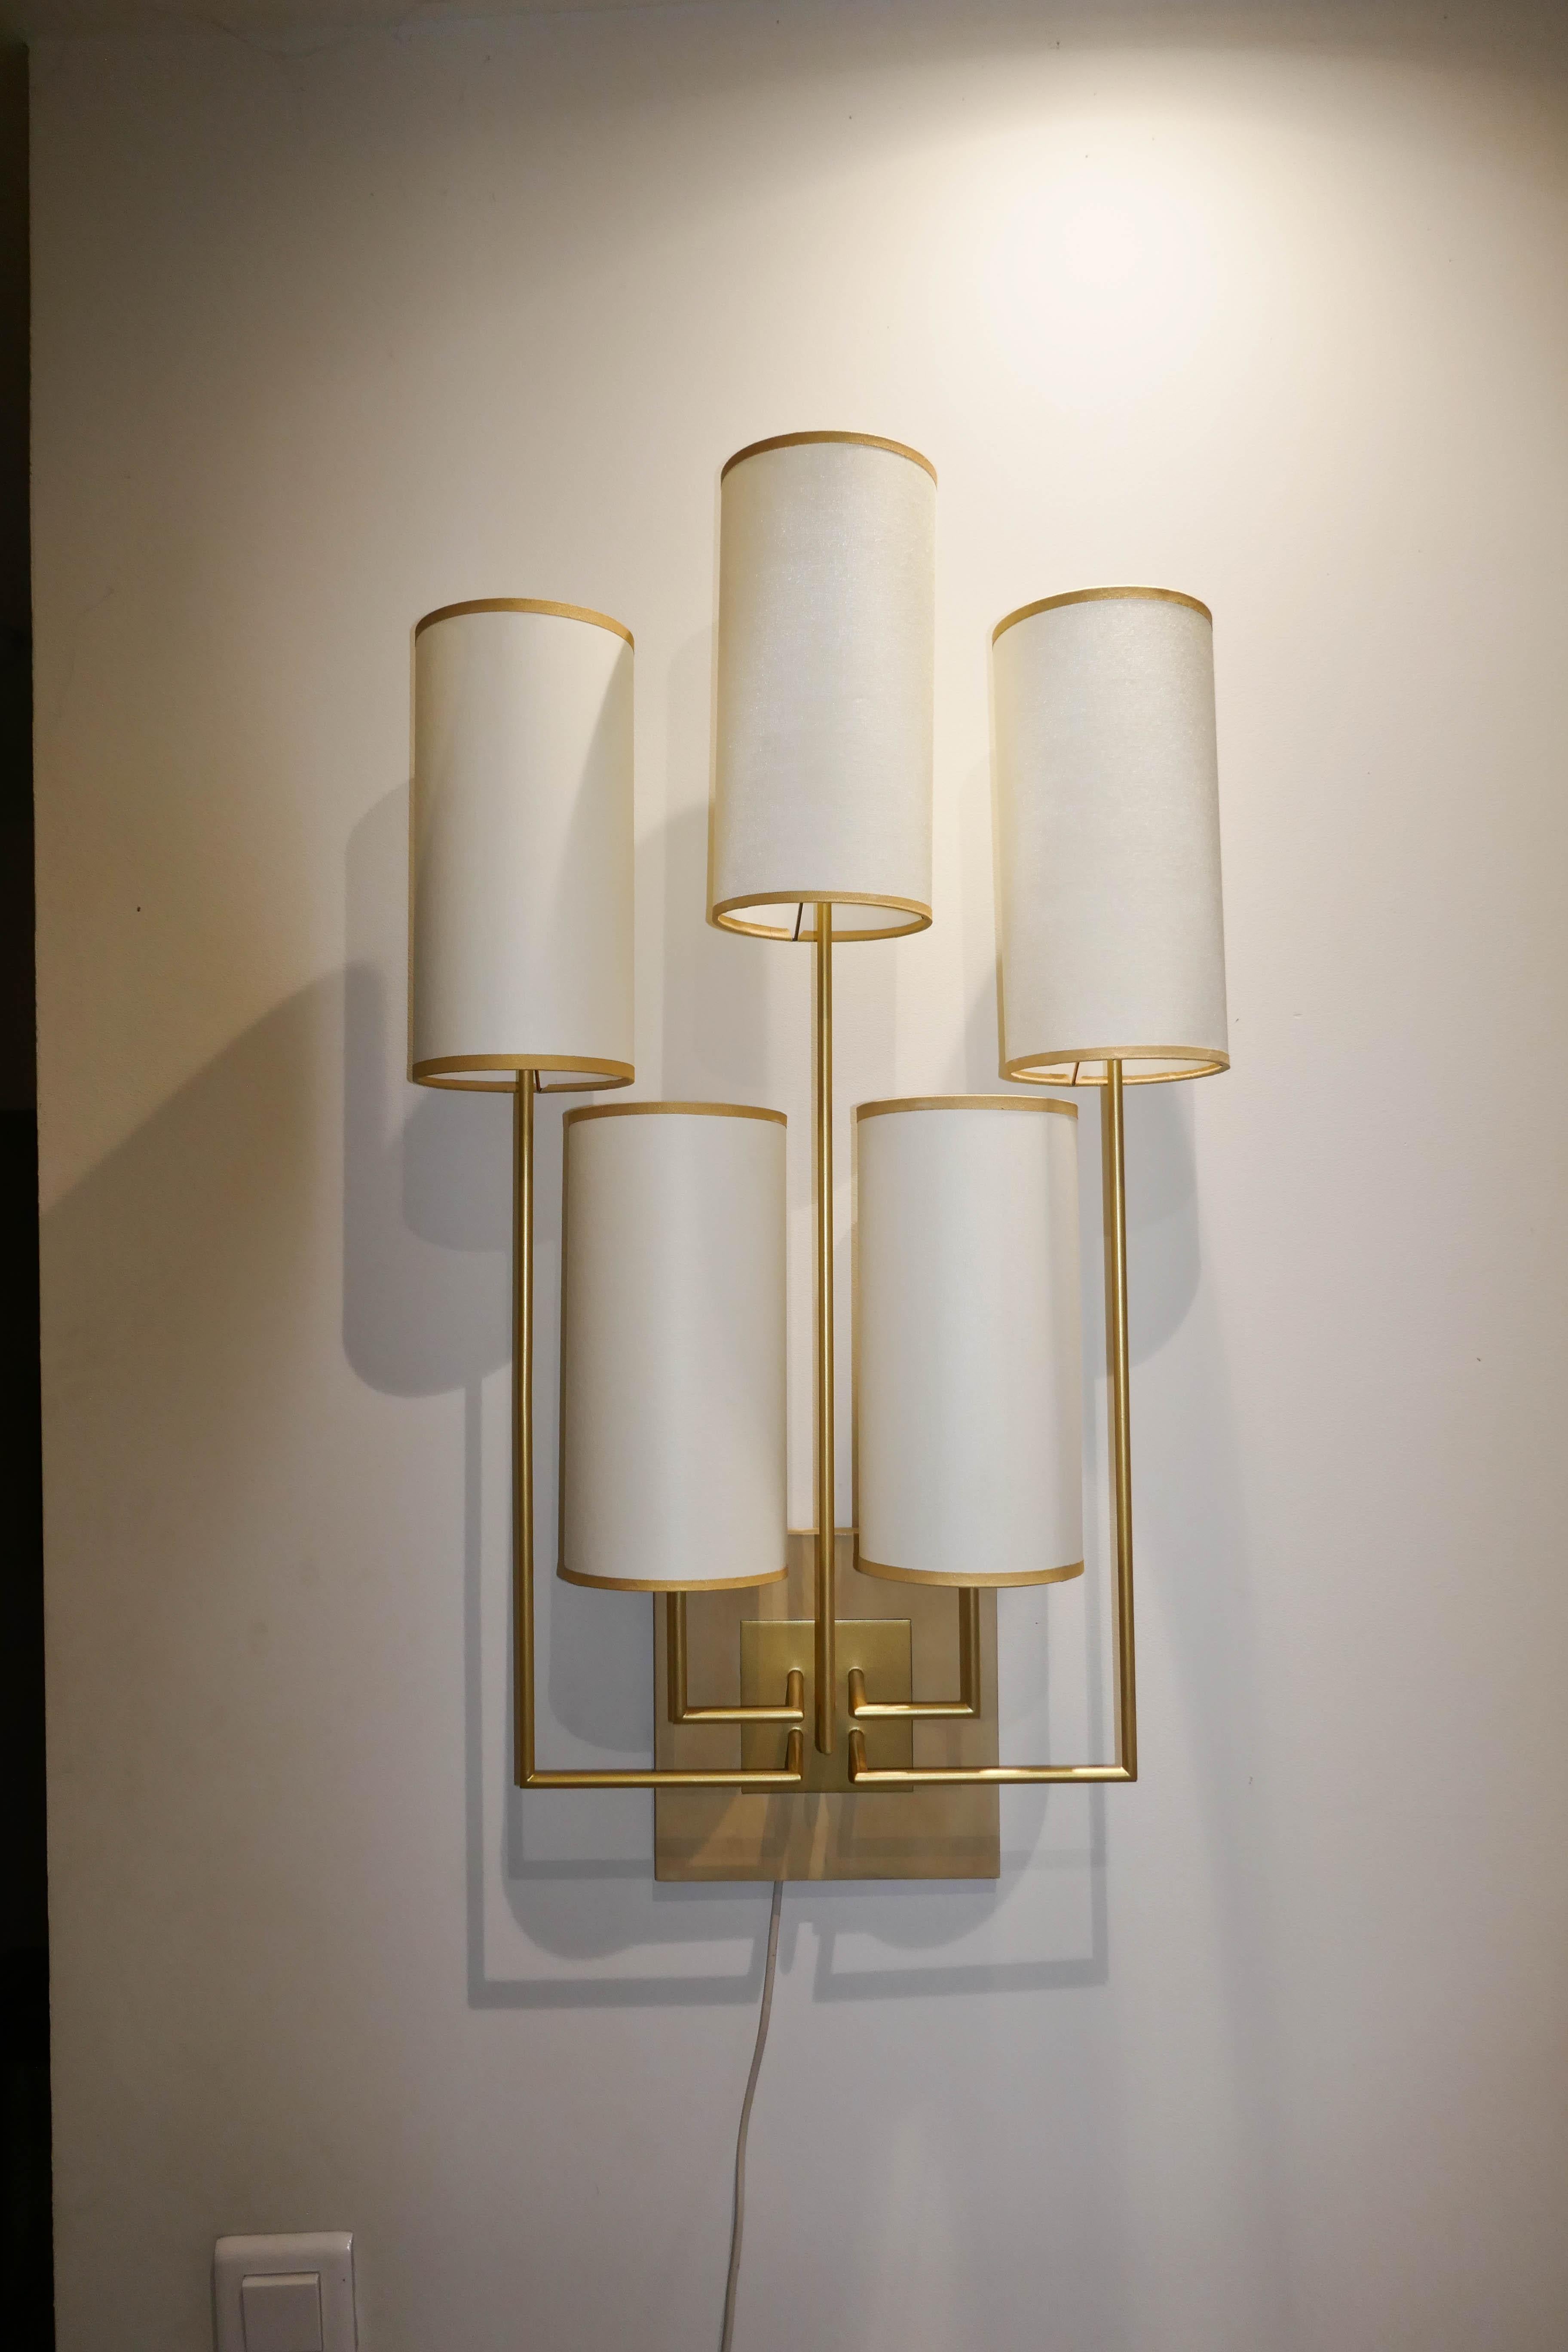 Wall light, sconce in gold patina metal, the base is in chestnut wood. There are five lampshades in white fabric.
This wall lamp is new but has been used for an exhibition.
This is for one item but can be sold as a pair.
Information about the covid